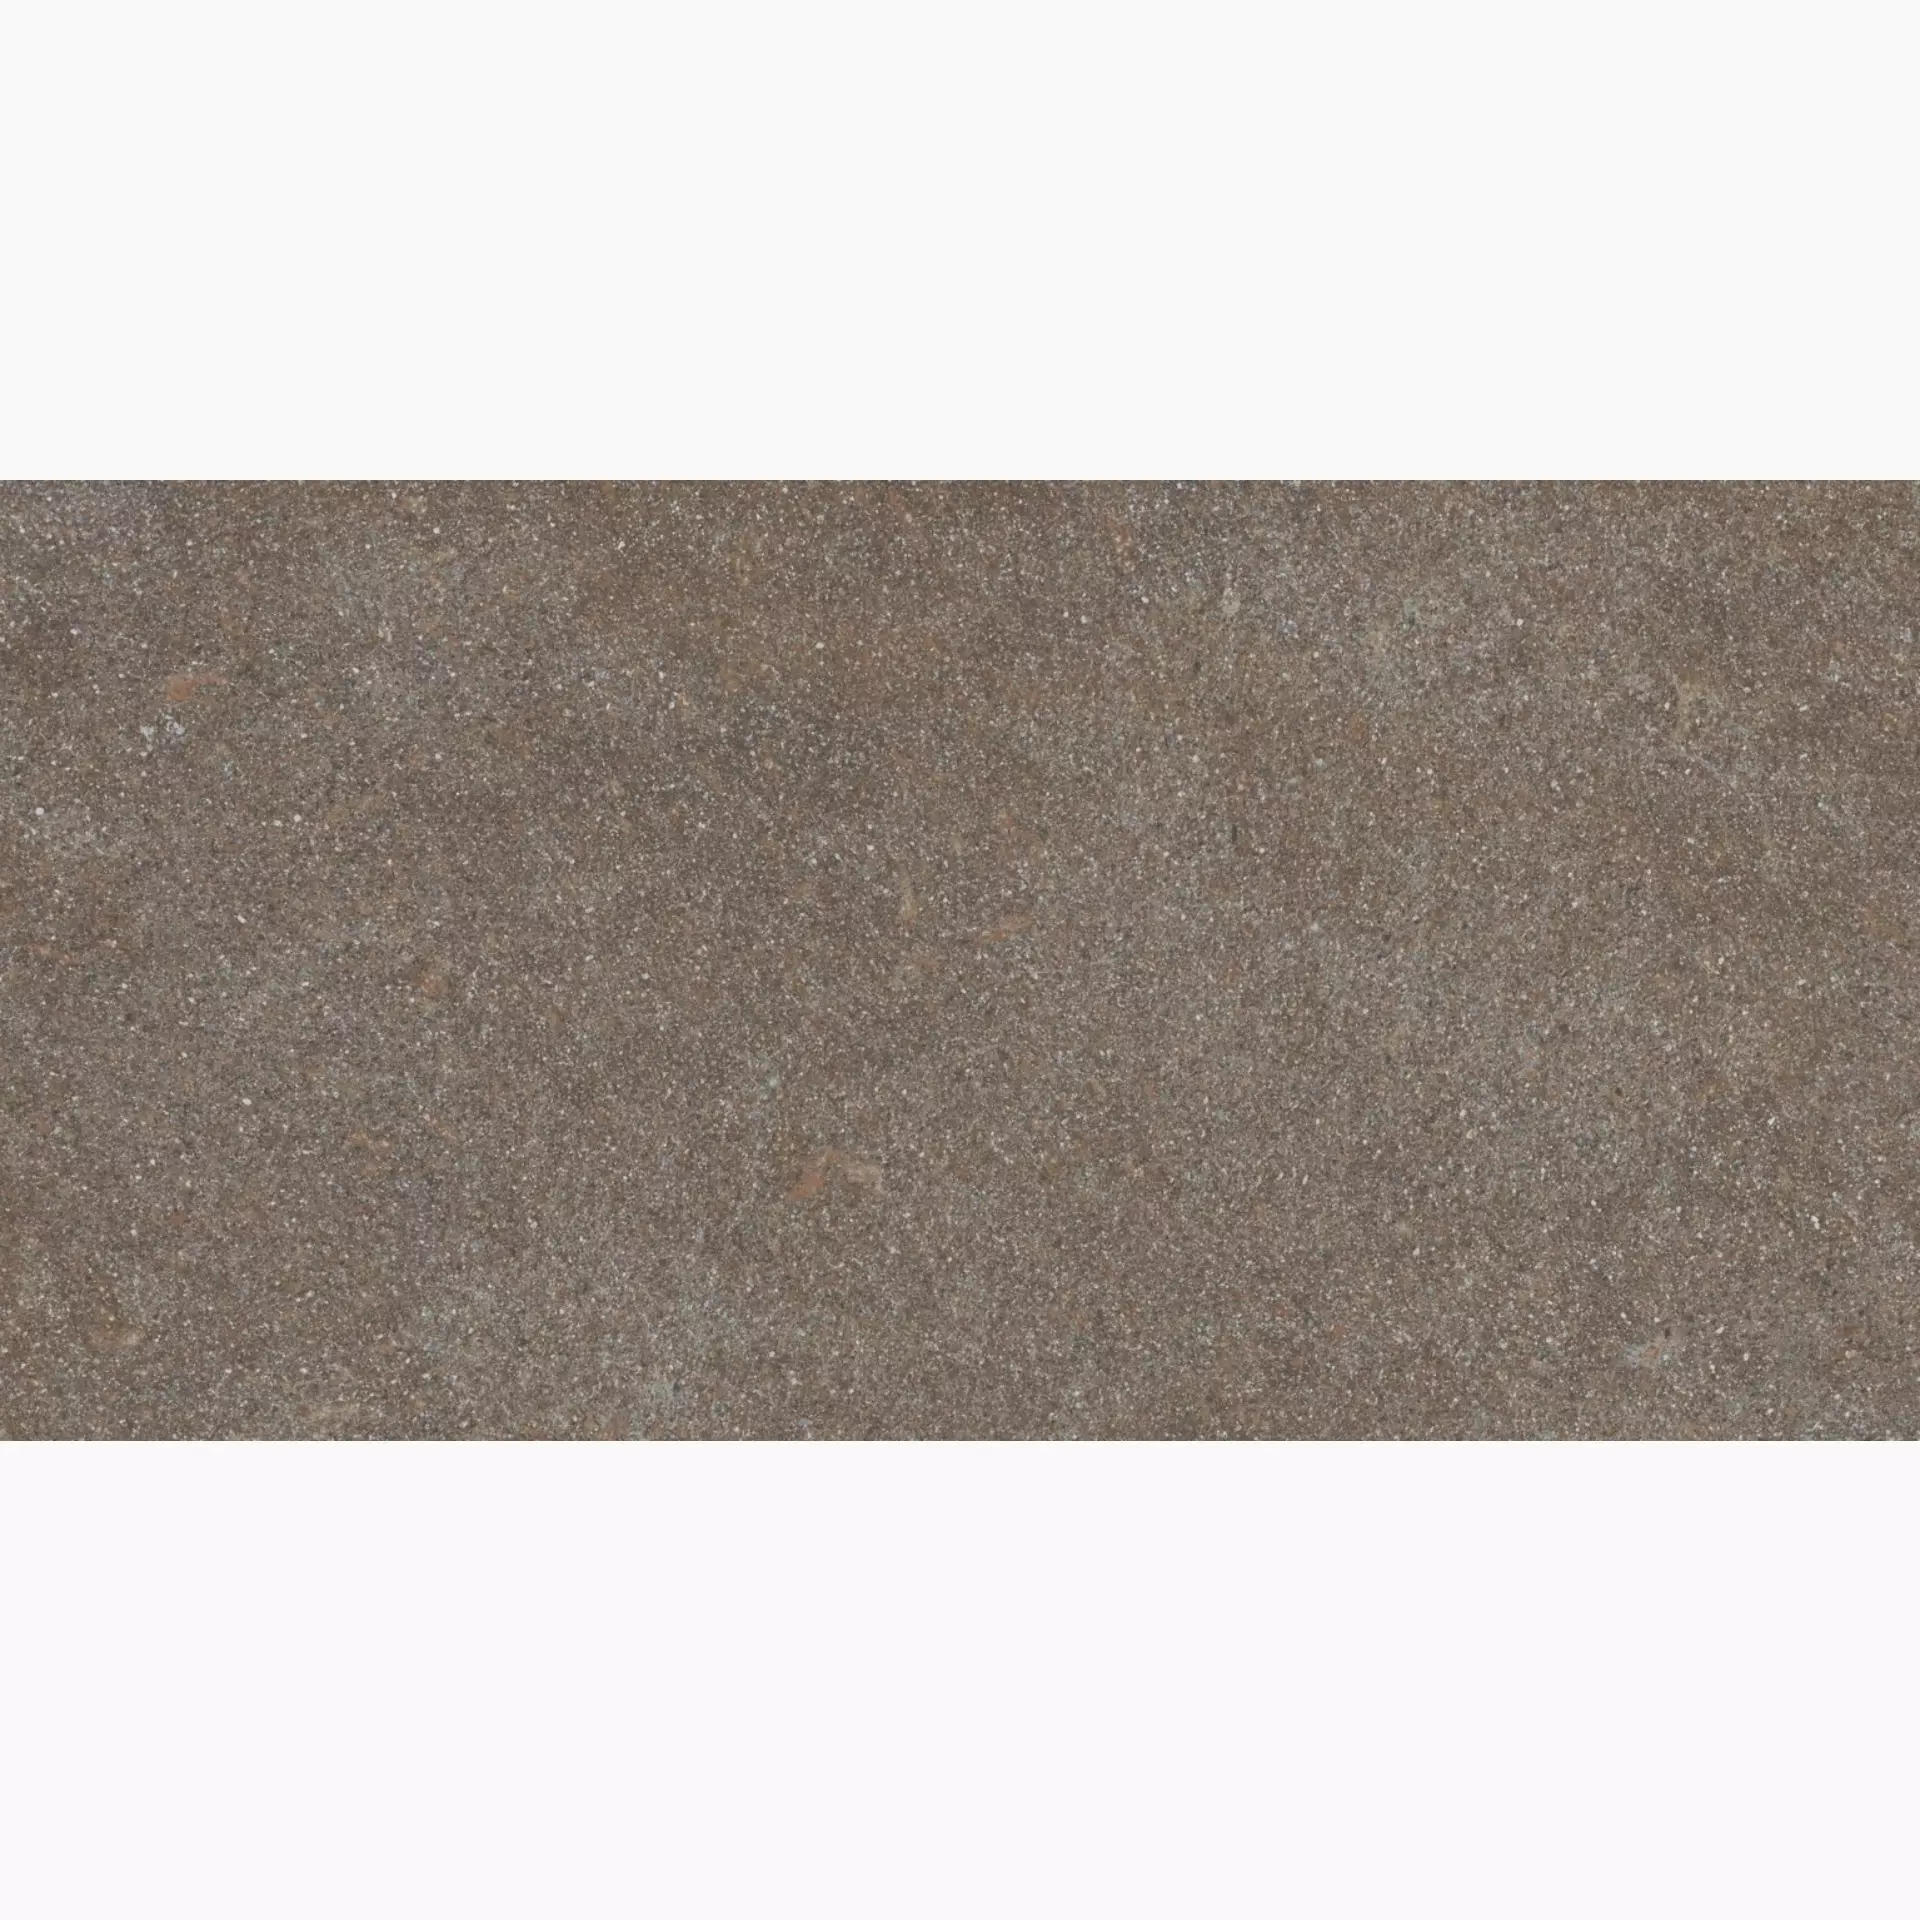 ABK Native Red Naturale PF60003904 60x120cm rectified 8,5mm